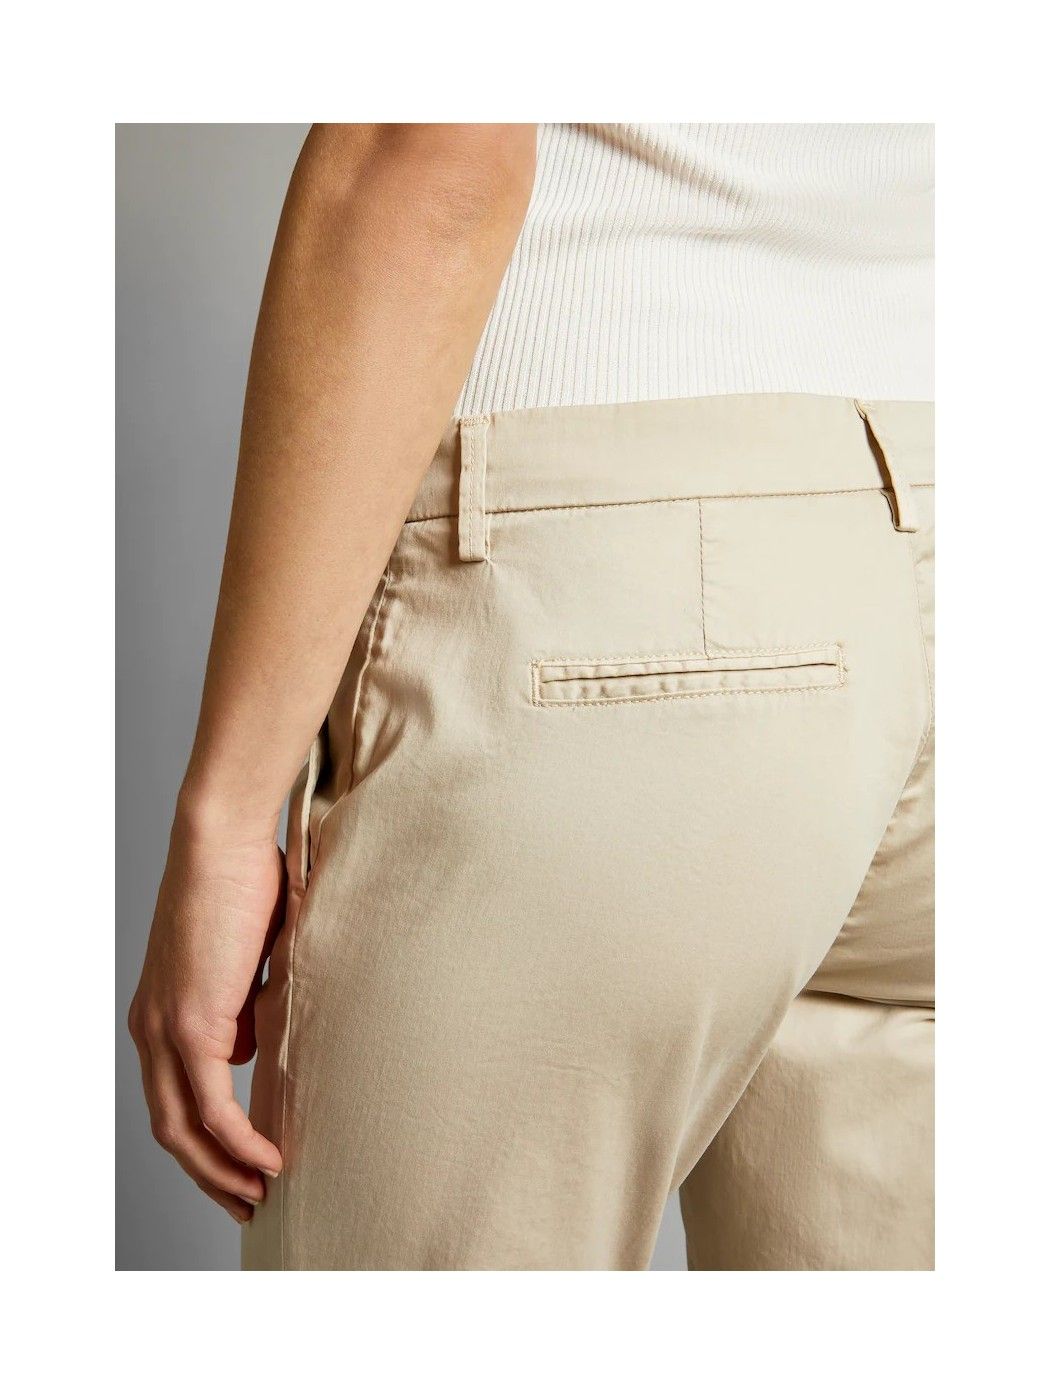 Chino model capri trousers made of garment-dyed stretch satin, with ironed crease and turned-up hem. Featuring diagonal front po